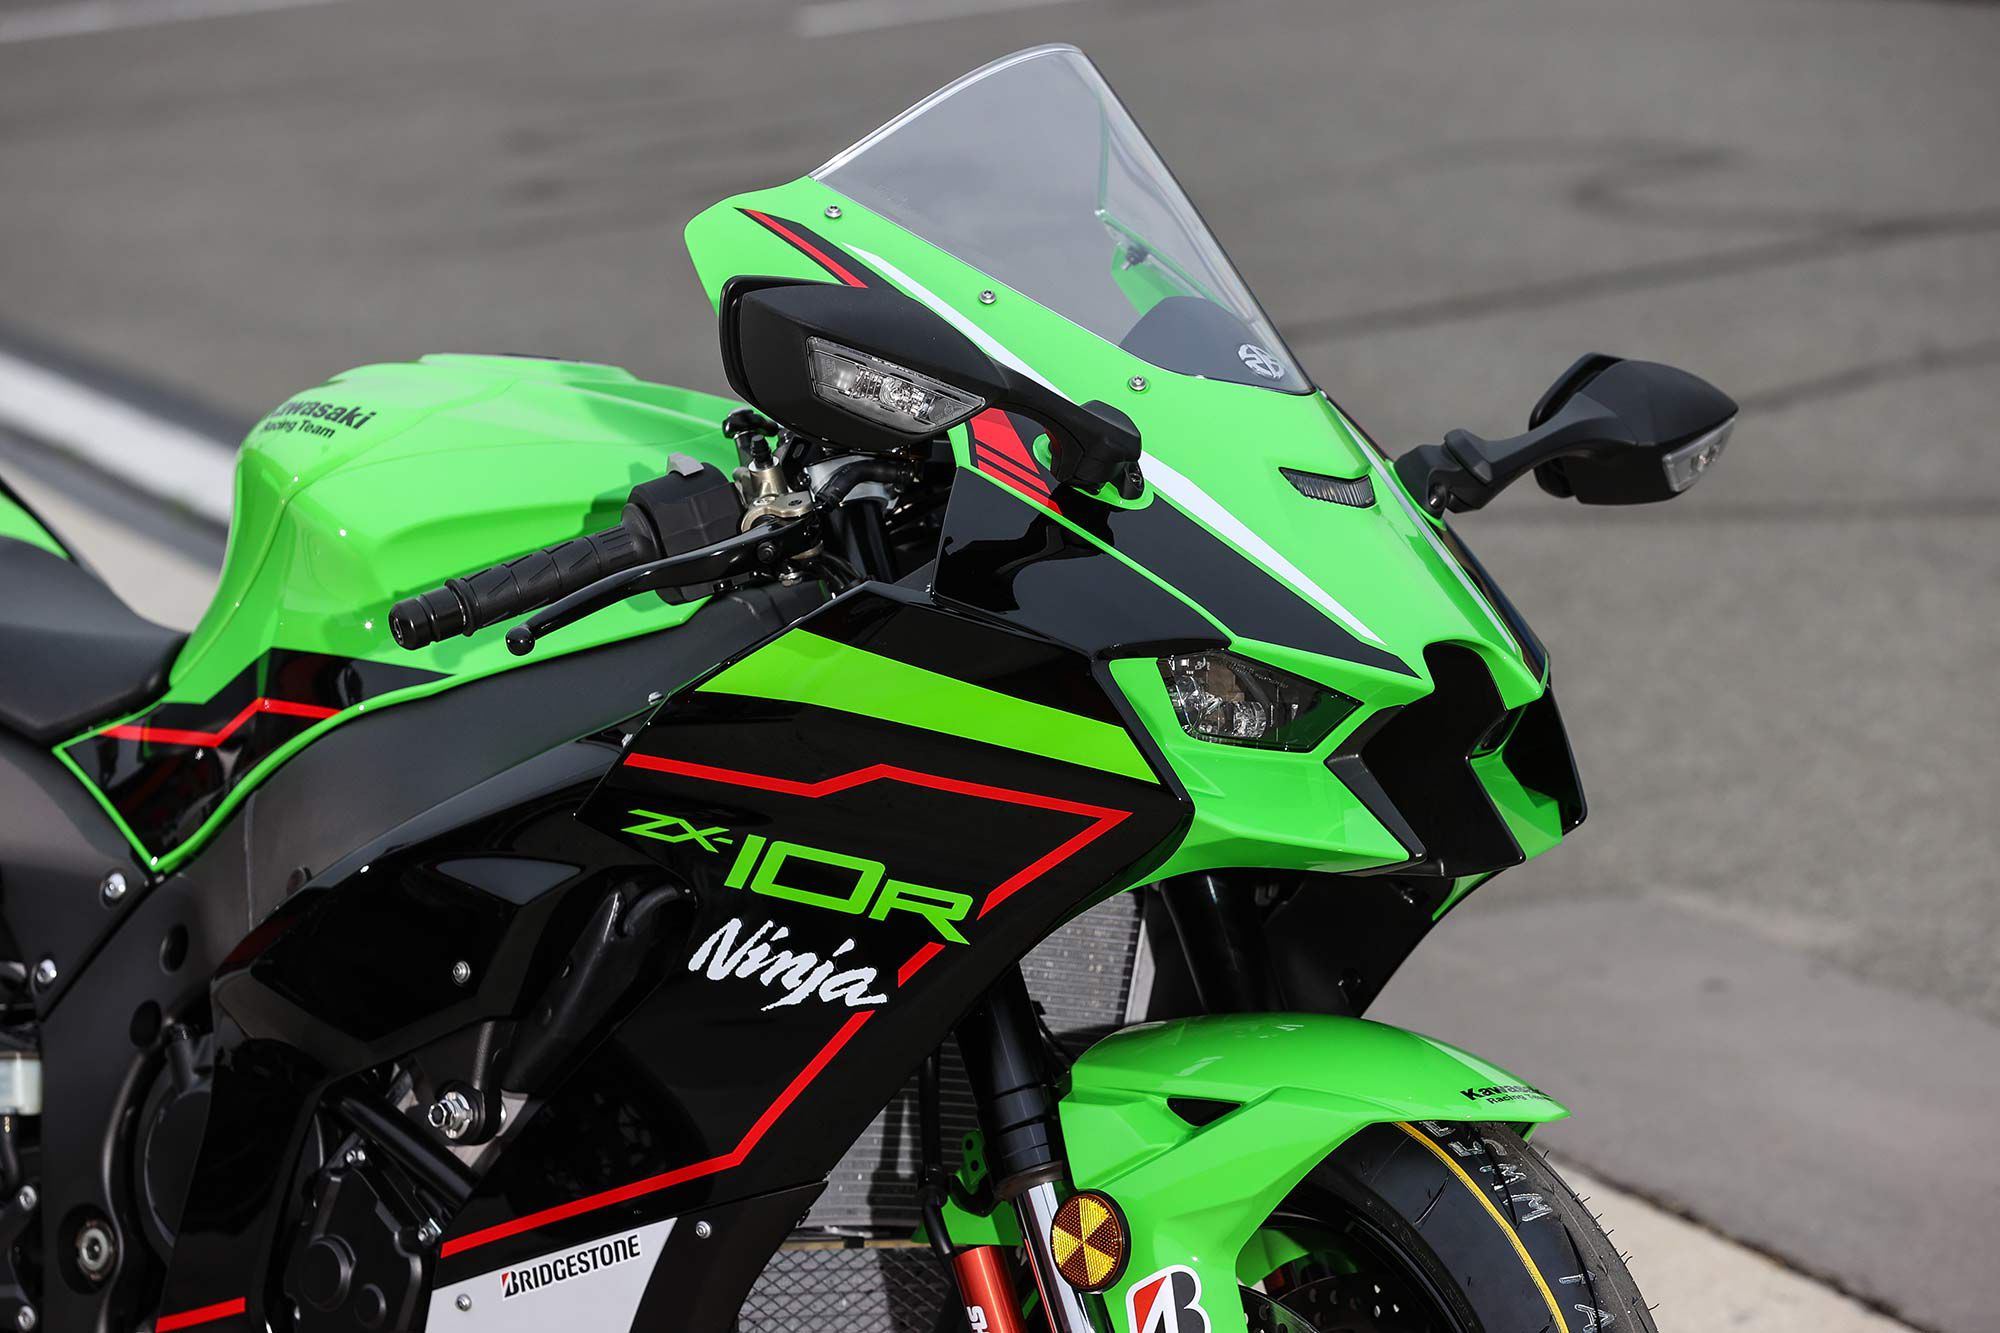 The new-generation Ninja styling is the most obvious update to the 2021 Kawasaki ZX-10R. Aside from aesthetic differences, the new fairing is said to improve aerodynamic efficiency by 7 percent, while integrated winglets claim a 17 percent downforce increase.